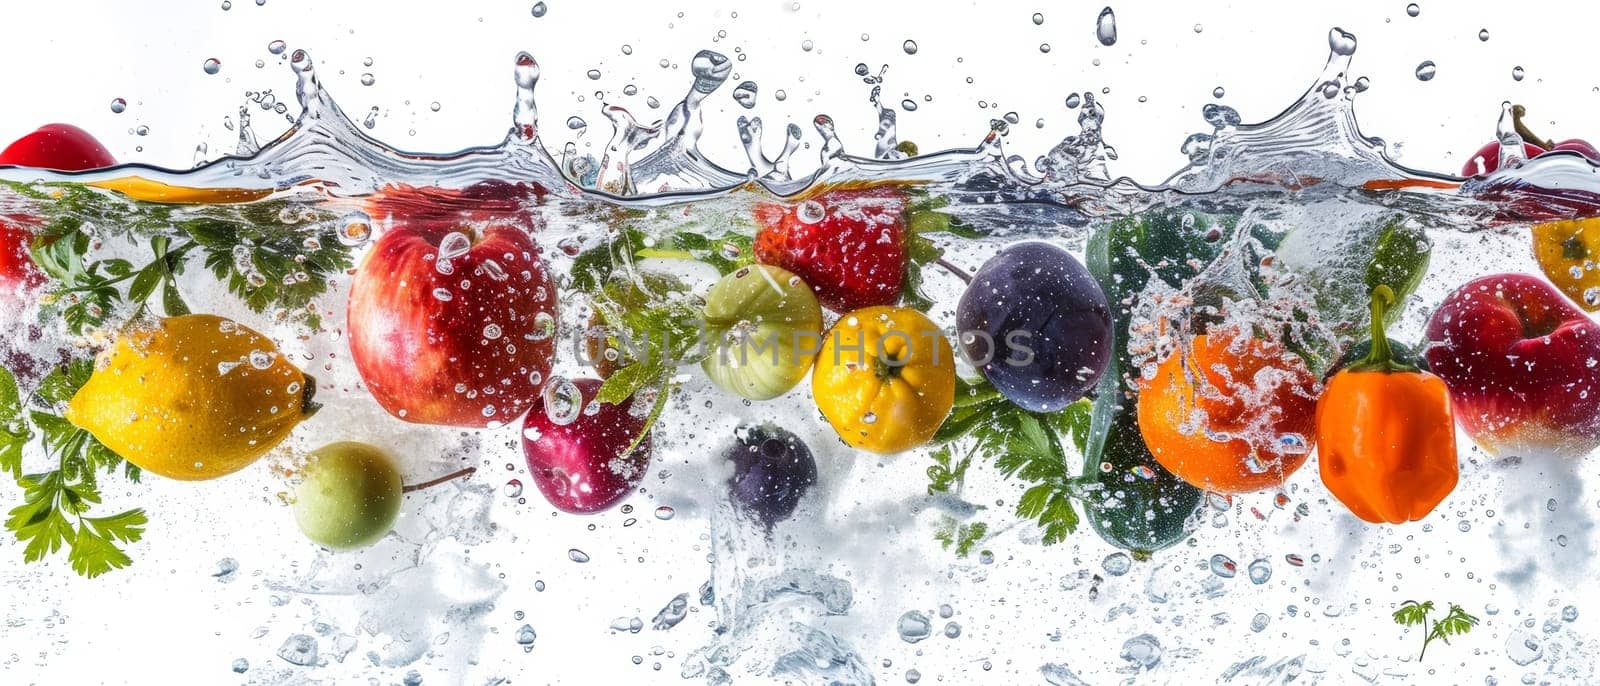 A dynamic display of various fruits and vegetables with a splash in clear water, capturing motion and freshness. by sfinks